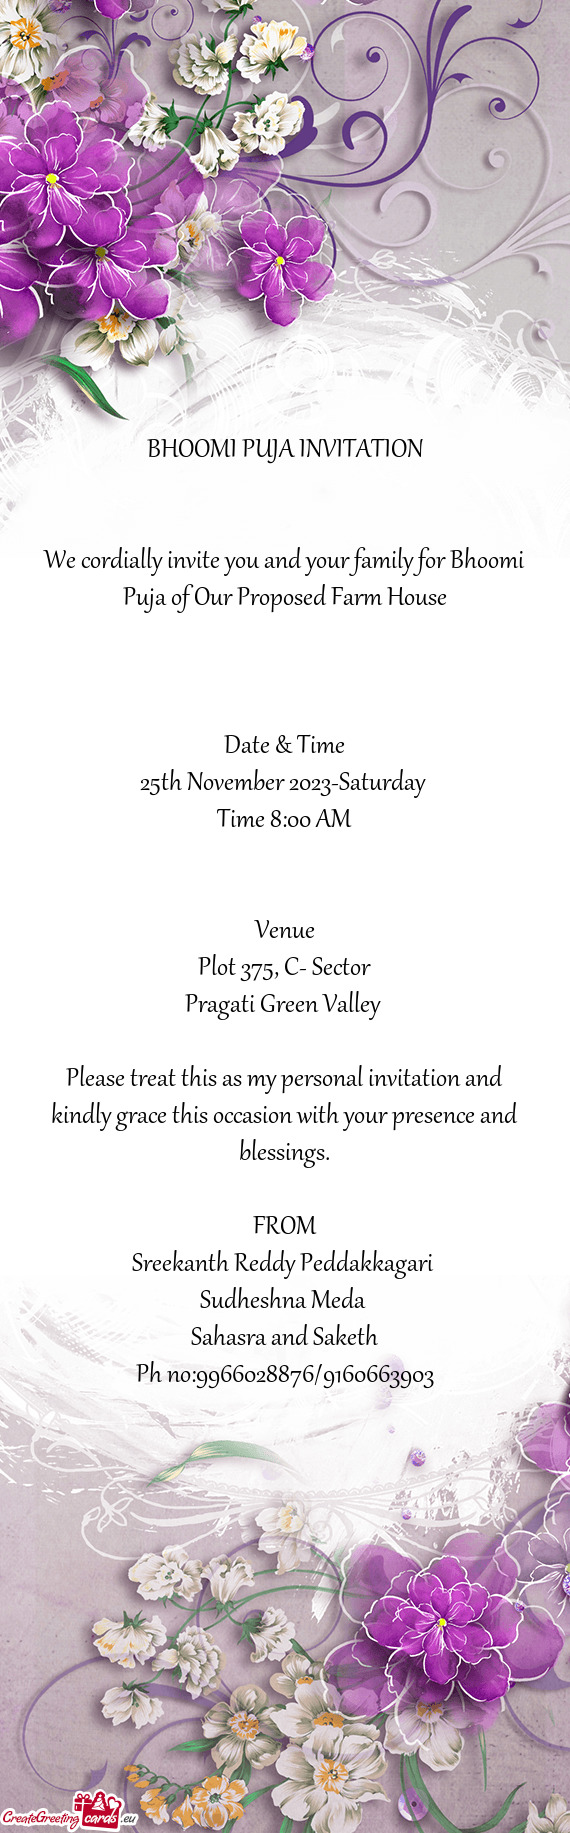 We cordially invite you and your family for Bhoomi Puja of Our Proposed Farm House